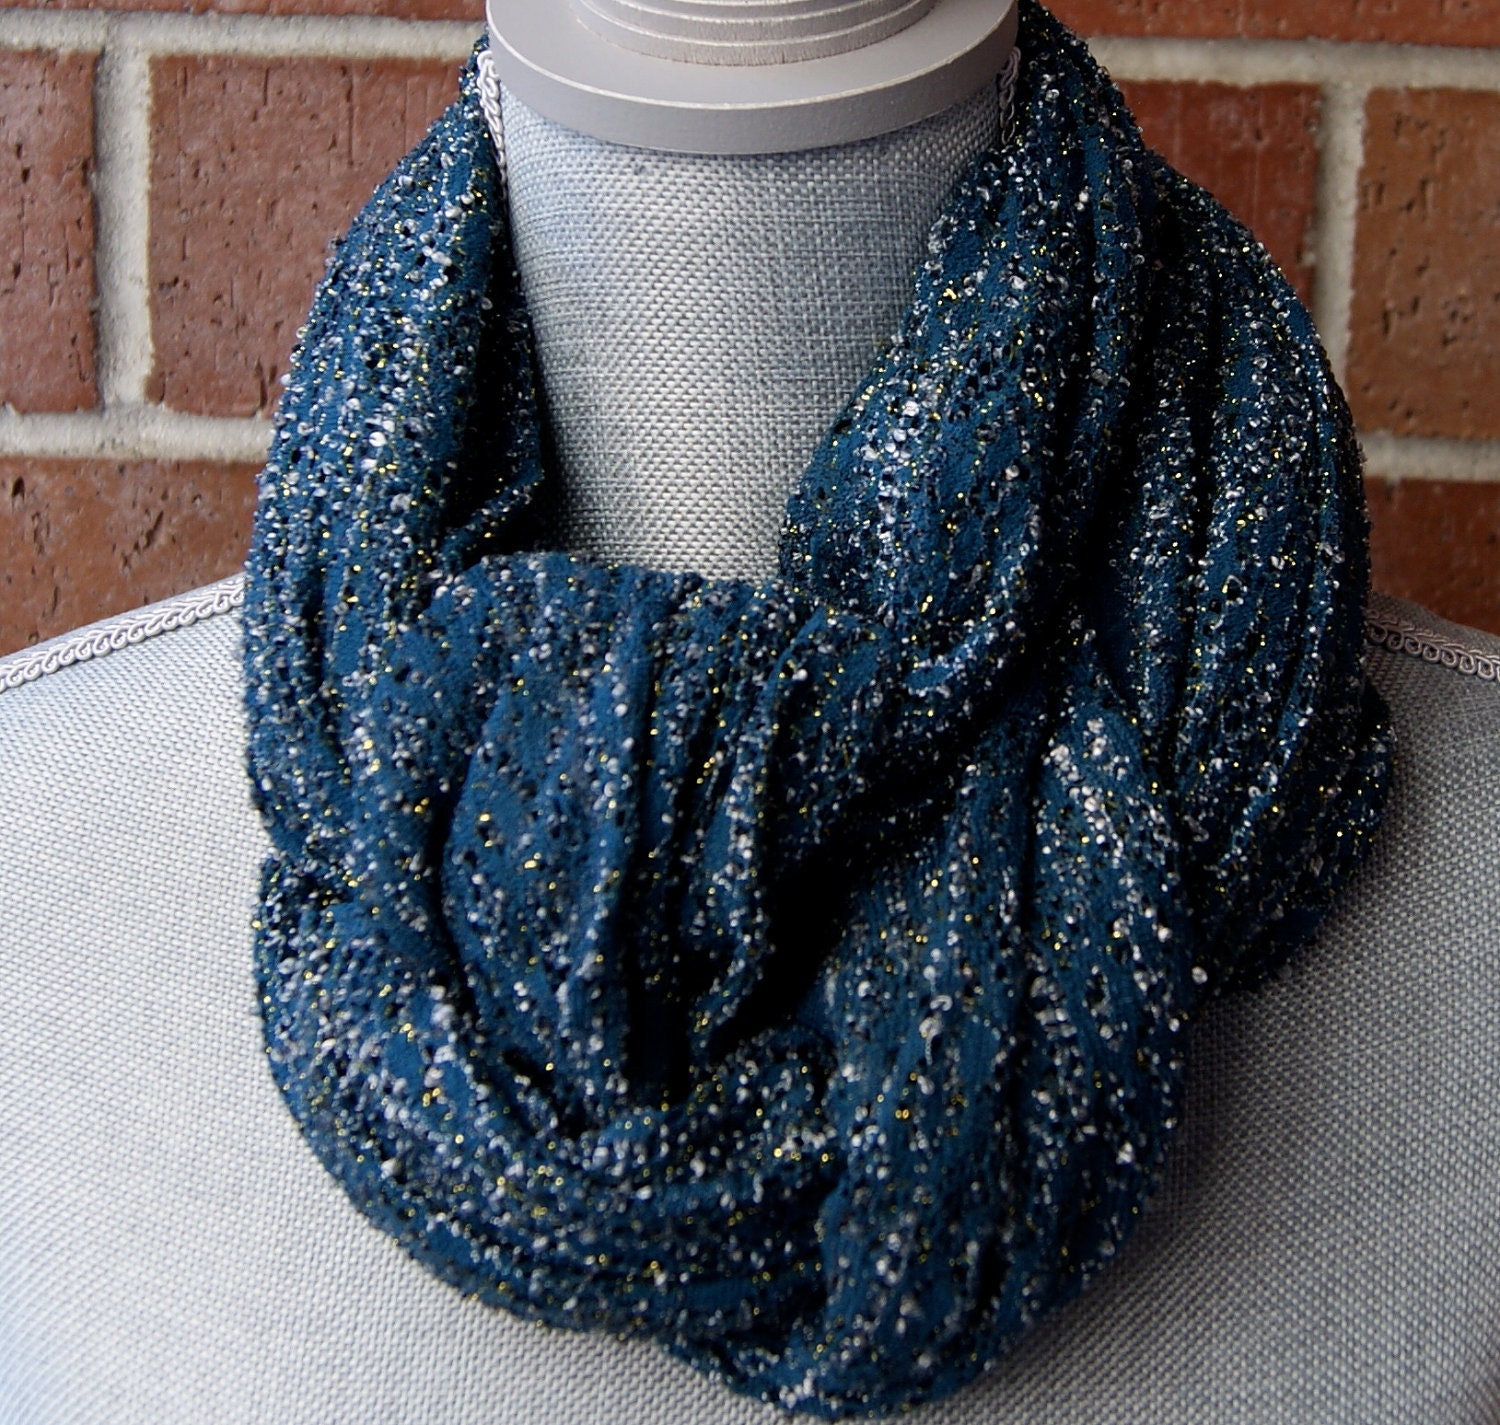 Blue Scarf with Gold Flakes - ScarfCollectibles